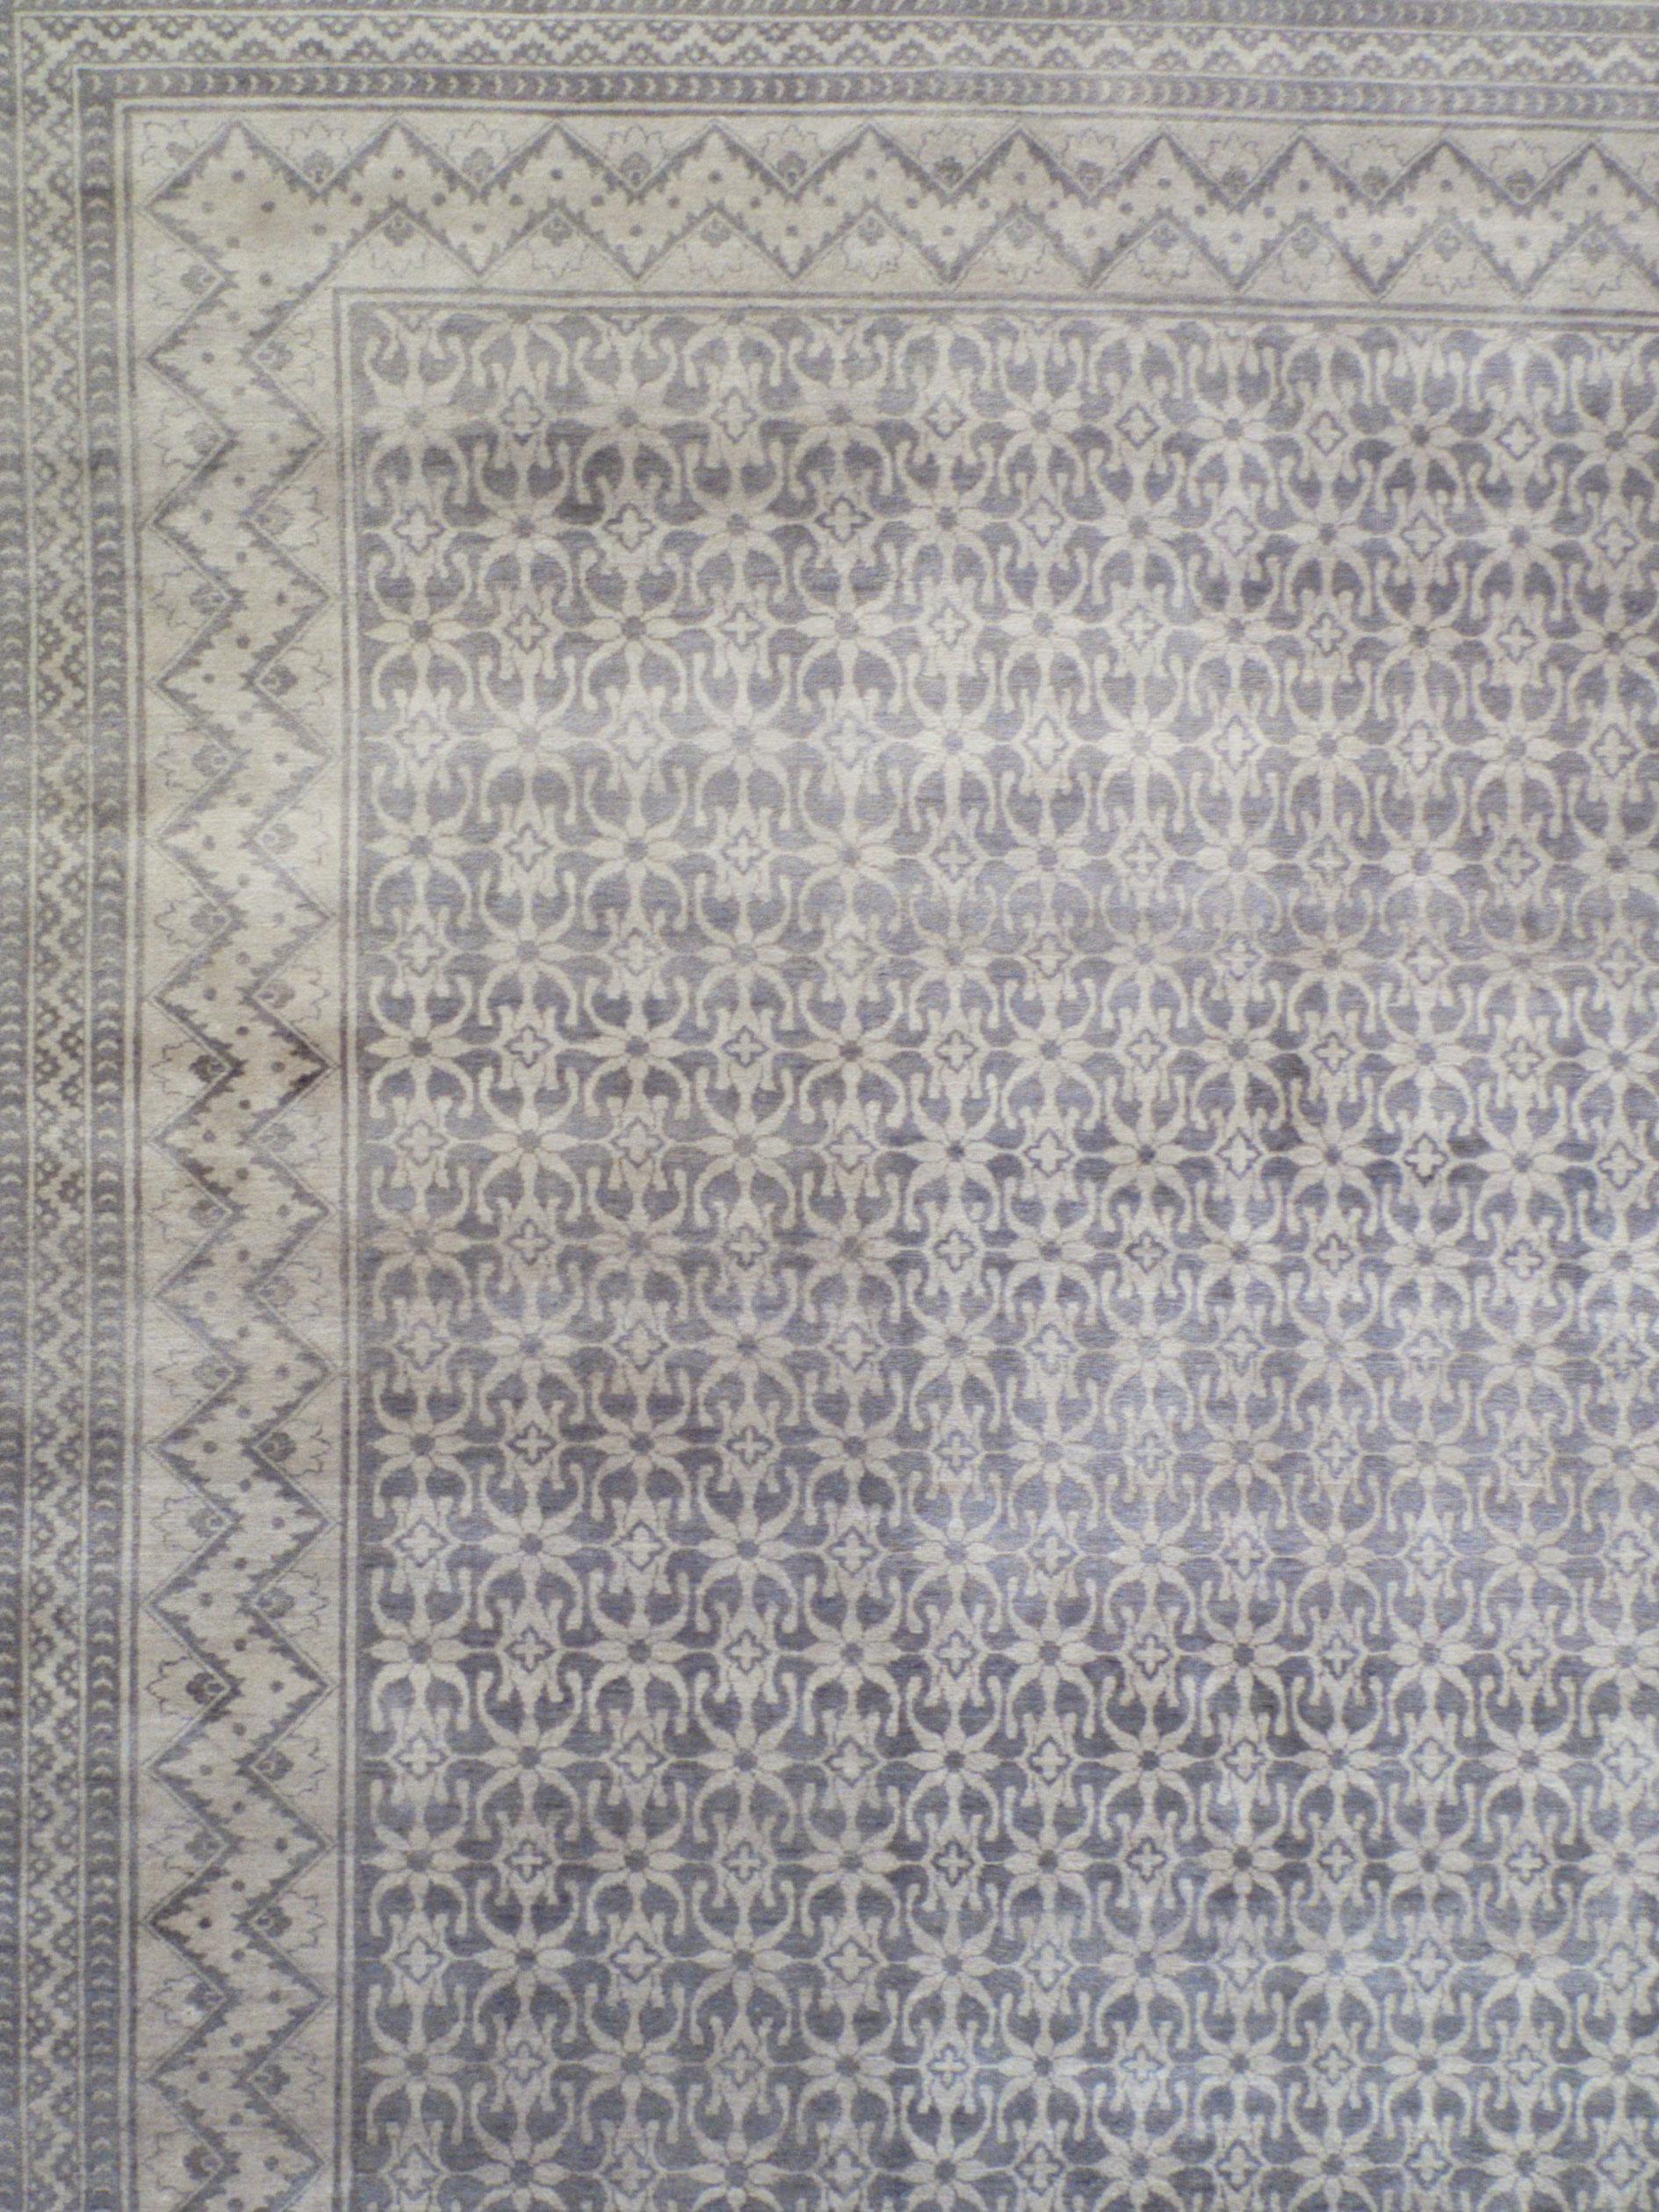 In soft and versatile shades of gray and steel blue wool, this hand-knotted carpet measures 8’10” x 11’10” and features a repetitive and transitional all-over pattern.  The carpet's design illustrates a flourishing gray flower garden, detailed in